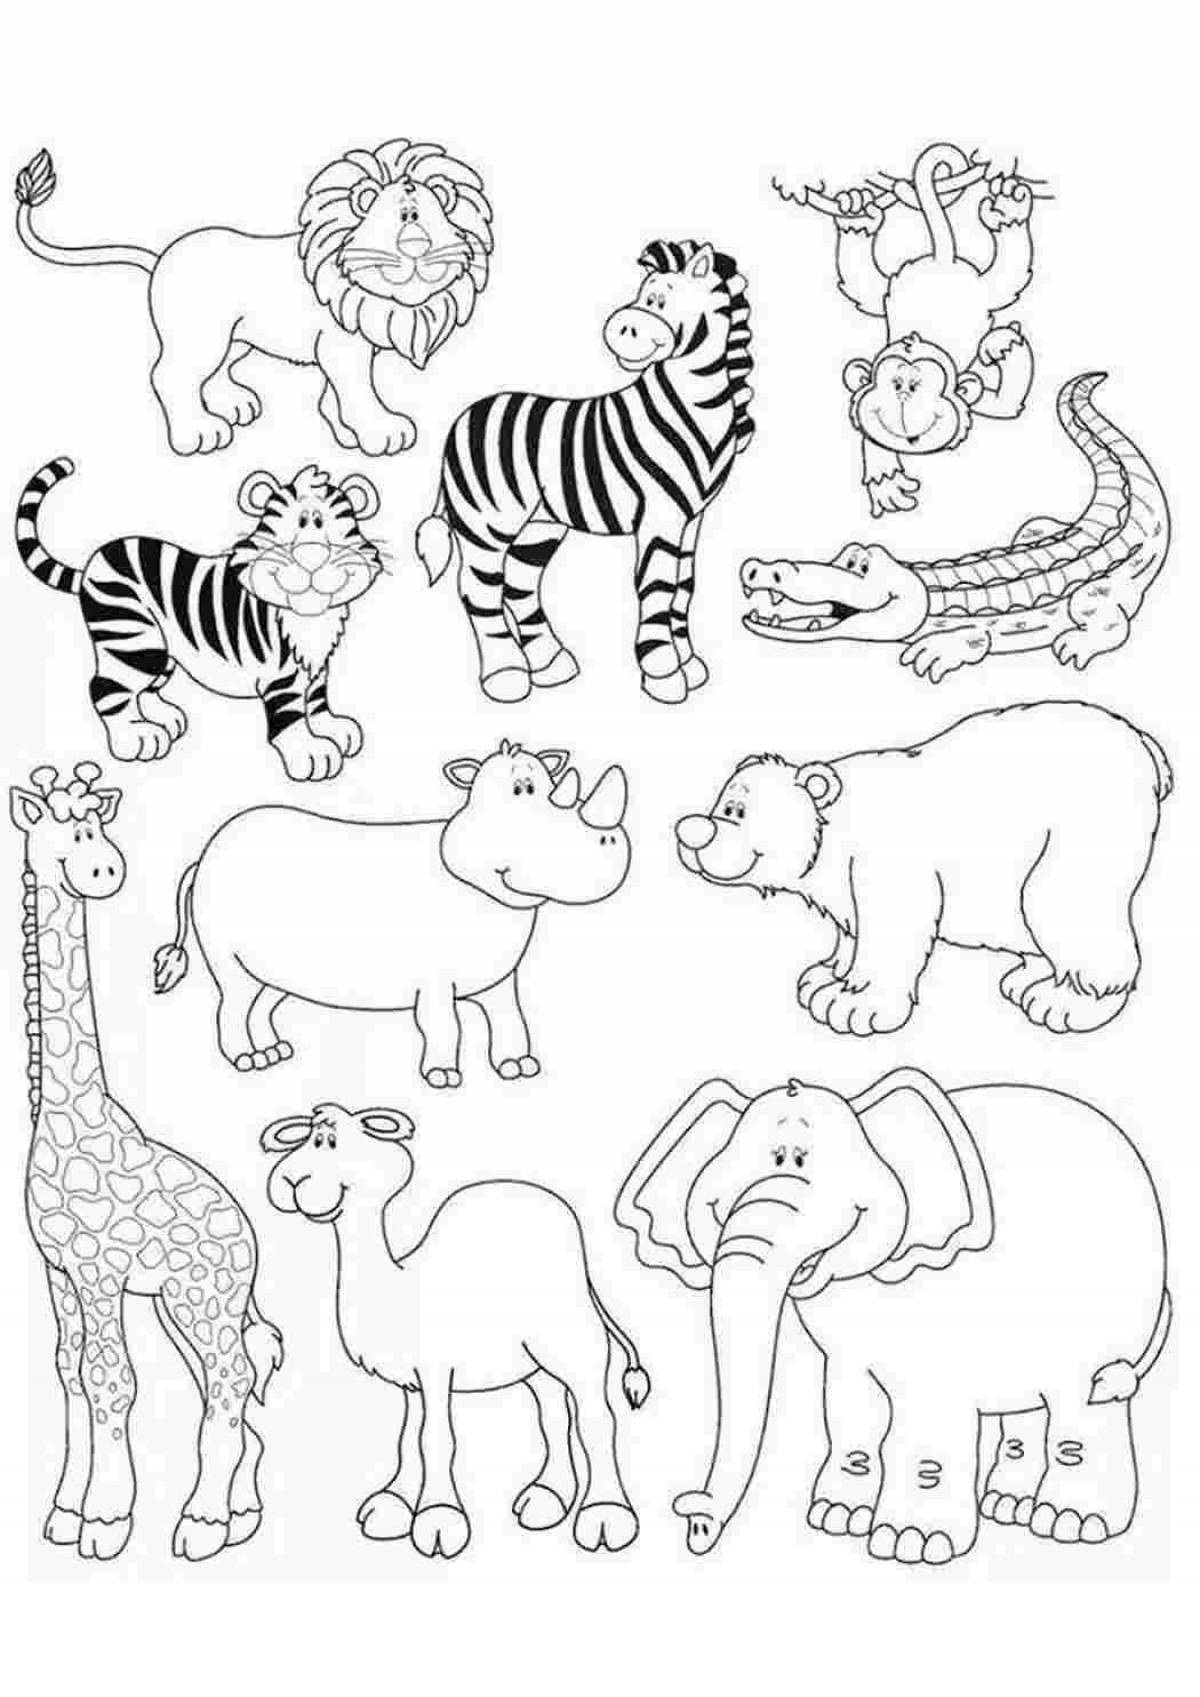 African animals coloring page for 4-5 year olds